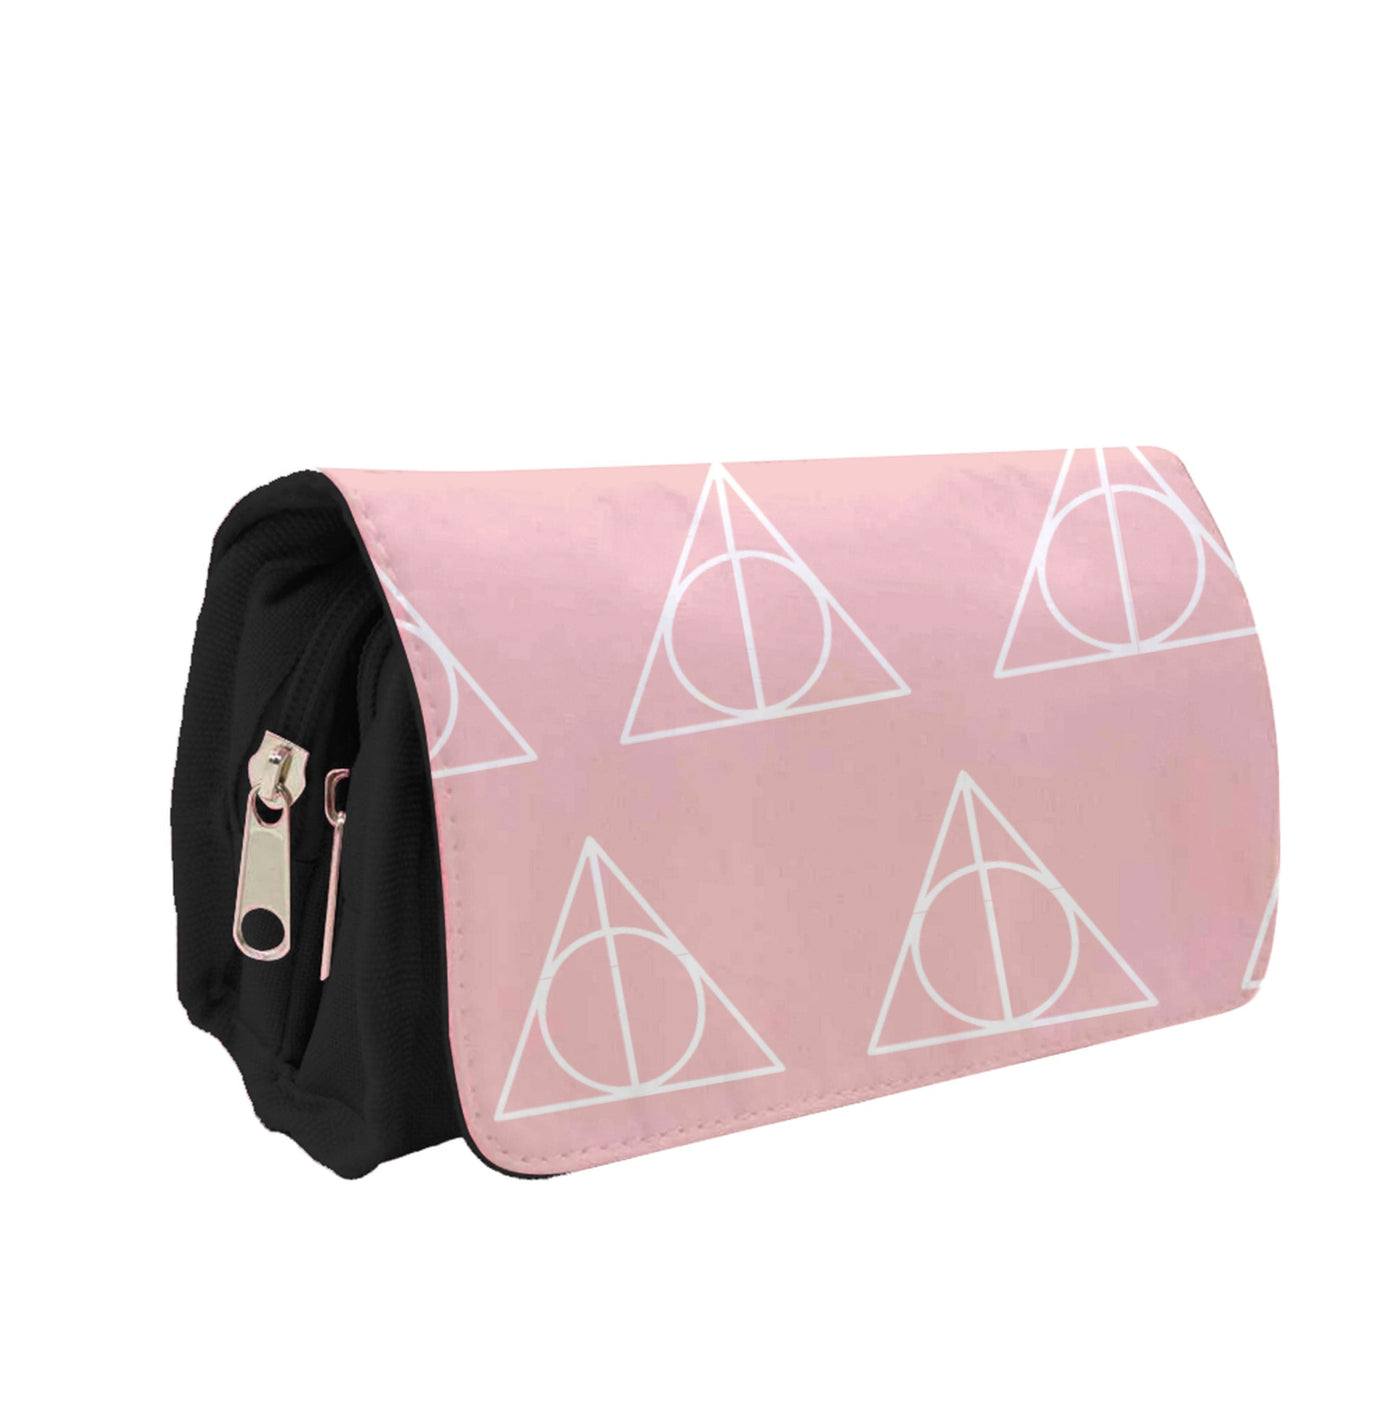 The Deathly Hallows Symbol Pattern - Harry Potter Pencil Case